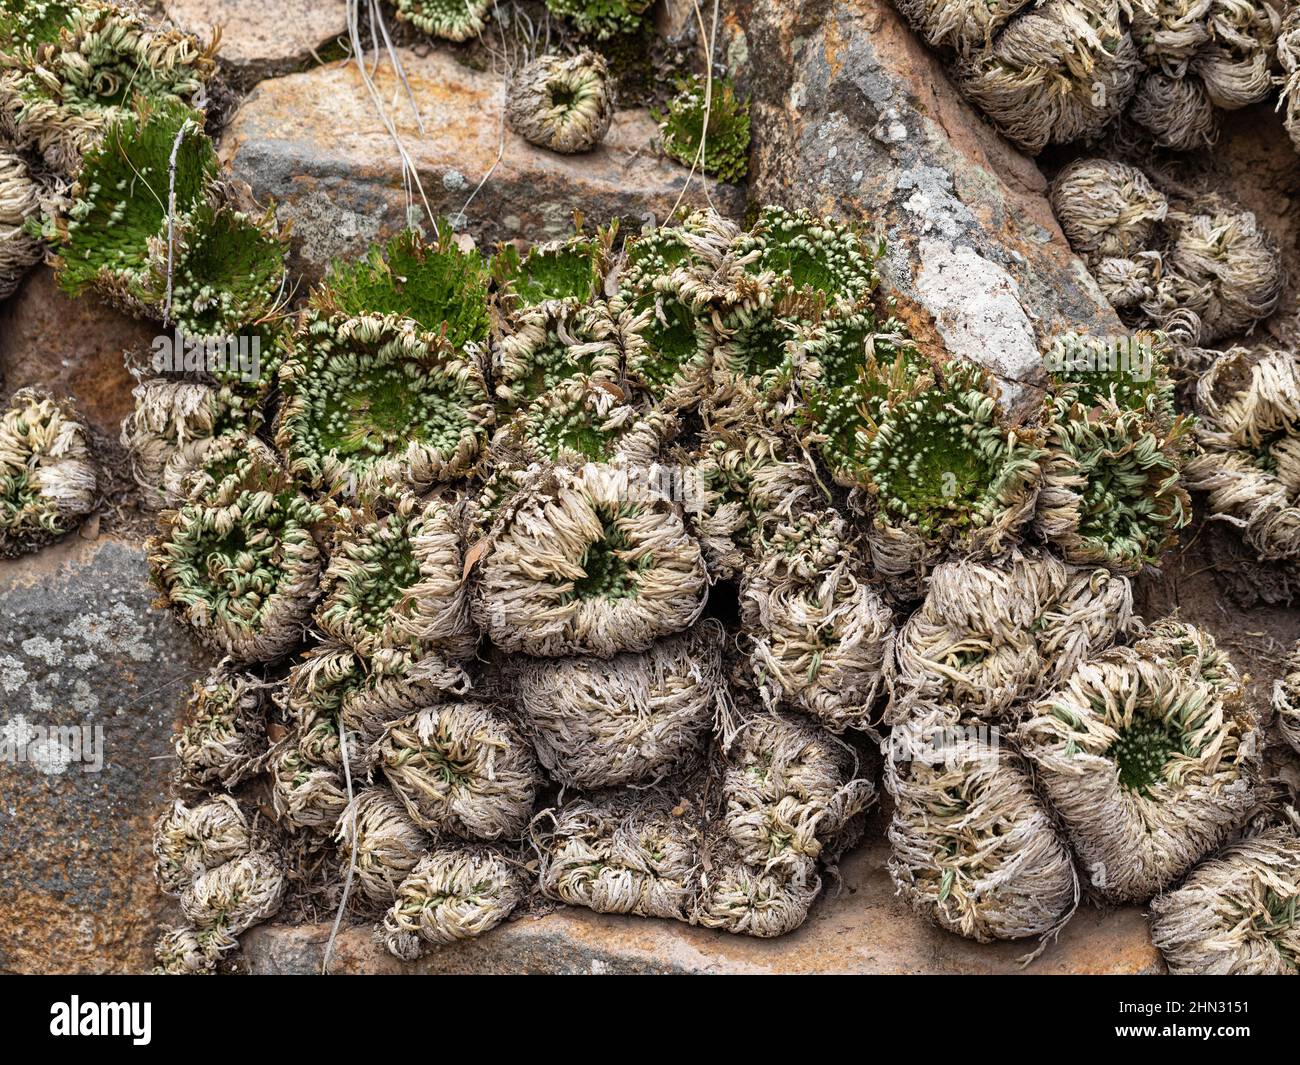 Hairy Resurrection Plant growing on a rocky slope is beginning to dry and fold inwards to protect the leaf surfaces during the dry season. Stock Photo